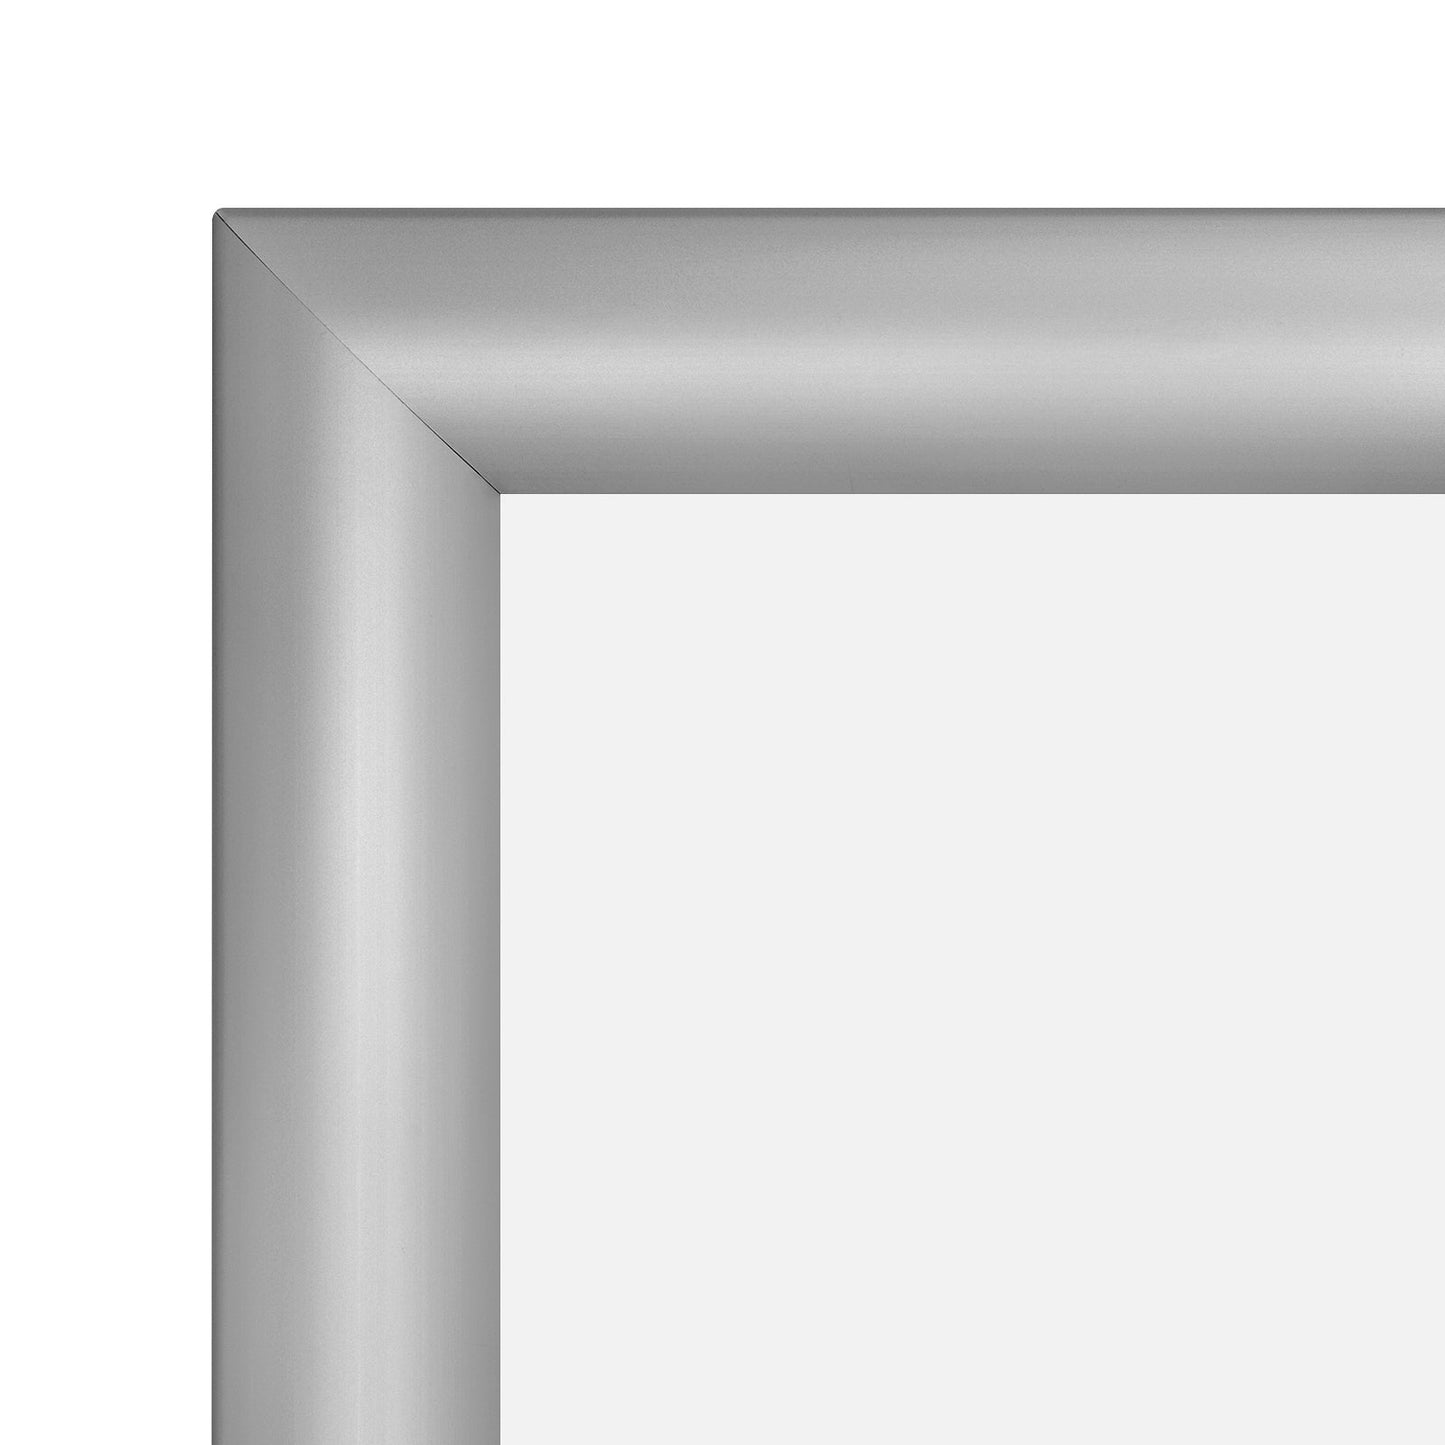 17x23  TRADEframe Silver Snap Frame 17x23 - 1.2 inch profile - Snap Frames Direct